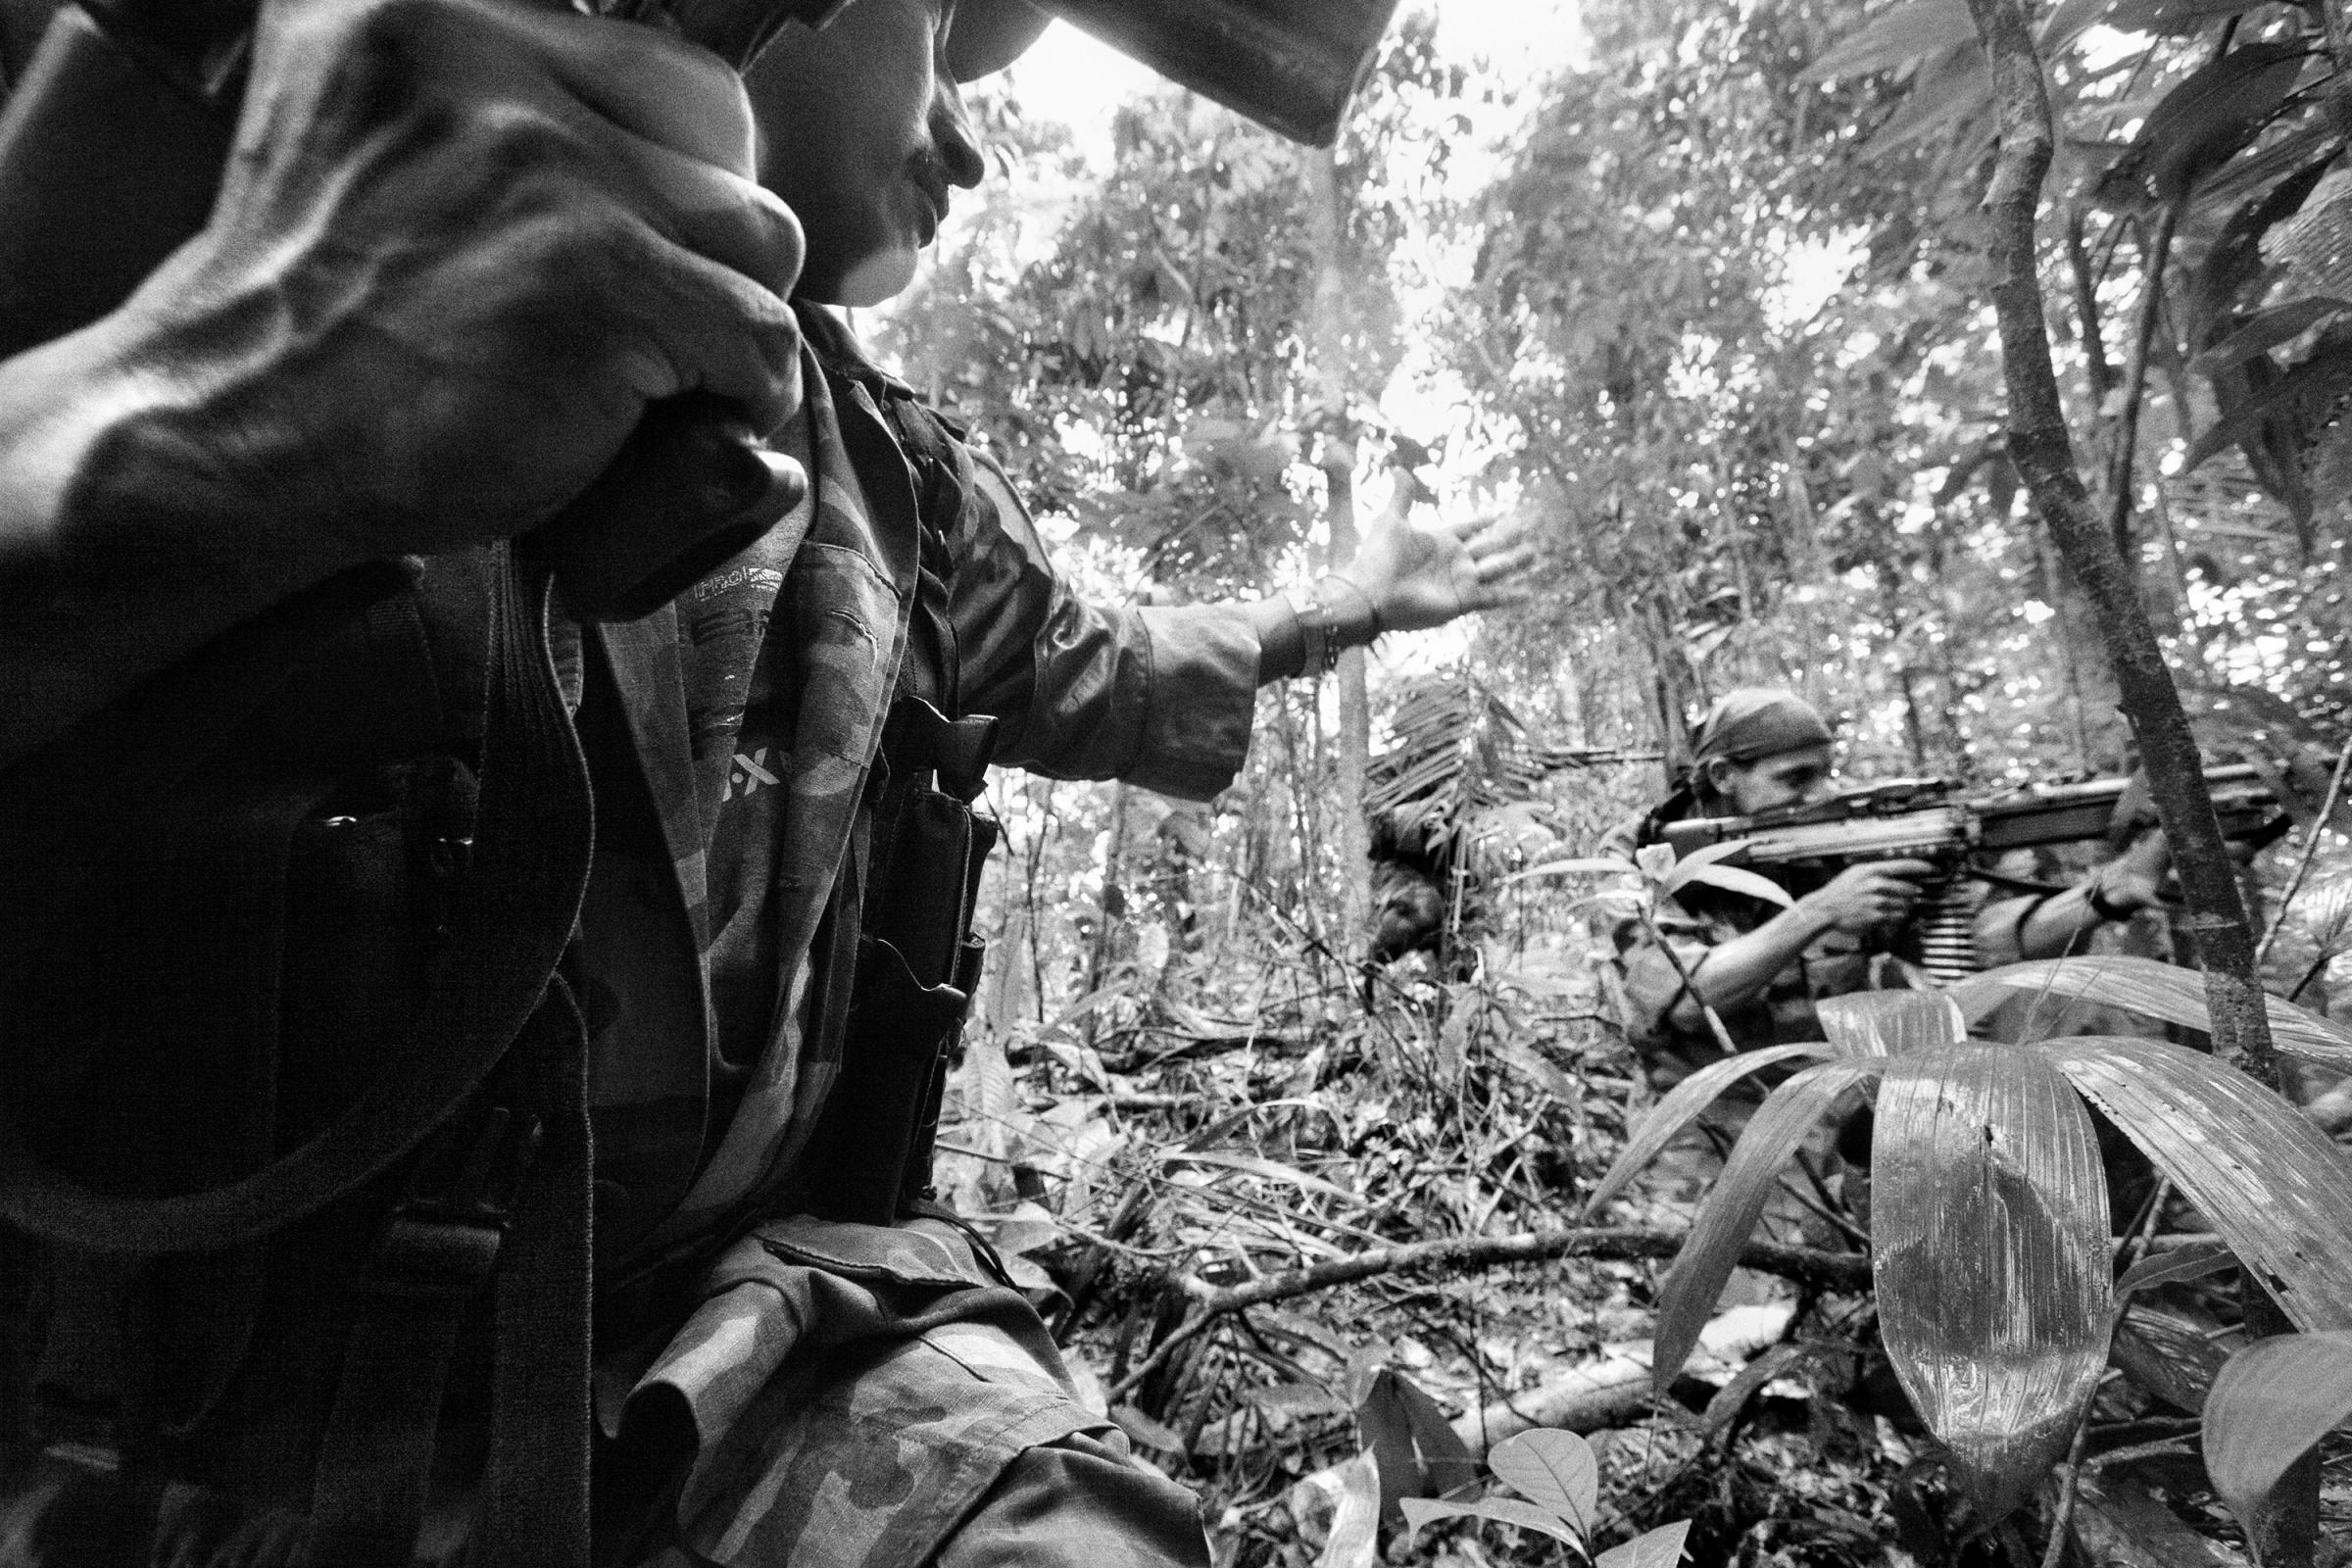 Members of the Bloque Movil Arturo Ruiz of the revolutionary armed forces of Colombia (FARC) during a patrol, Nov. 2007. They are a special unit of FARC who fight in many different regions of Colombia. This unit is like a quick reaction force who help other sub-groups of FARC. About 35% of the Colombian Territory is under the strict control of the Revolutionary Forces of Colombia, or the FARC, as the self-declared Marxist-Leninist guerrilla is known in this country, where they have operated since 1964.